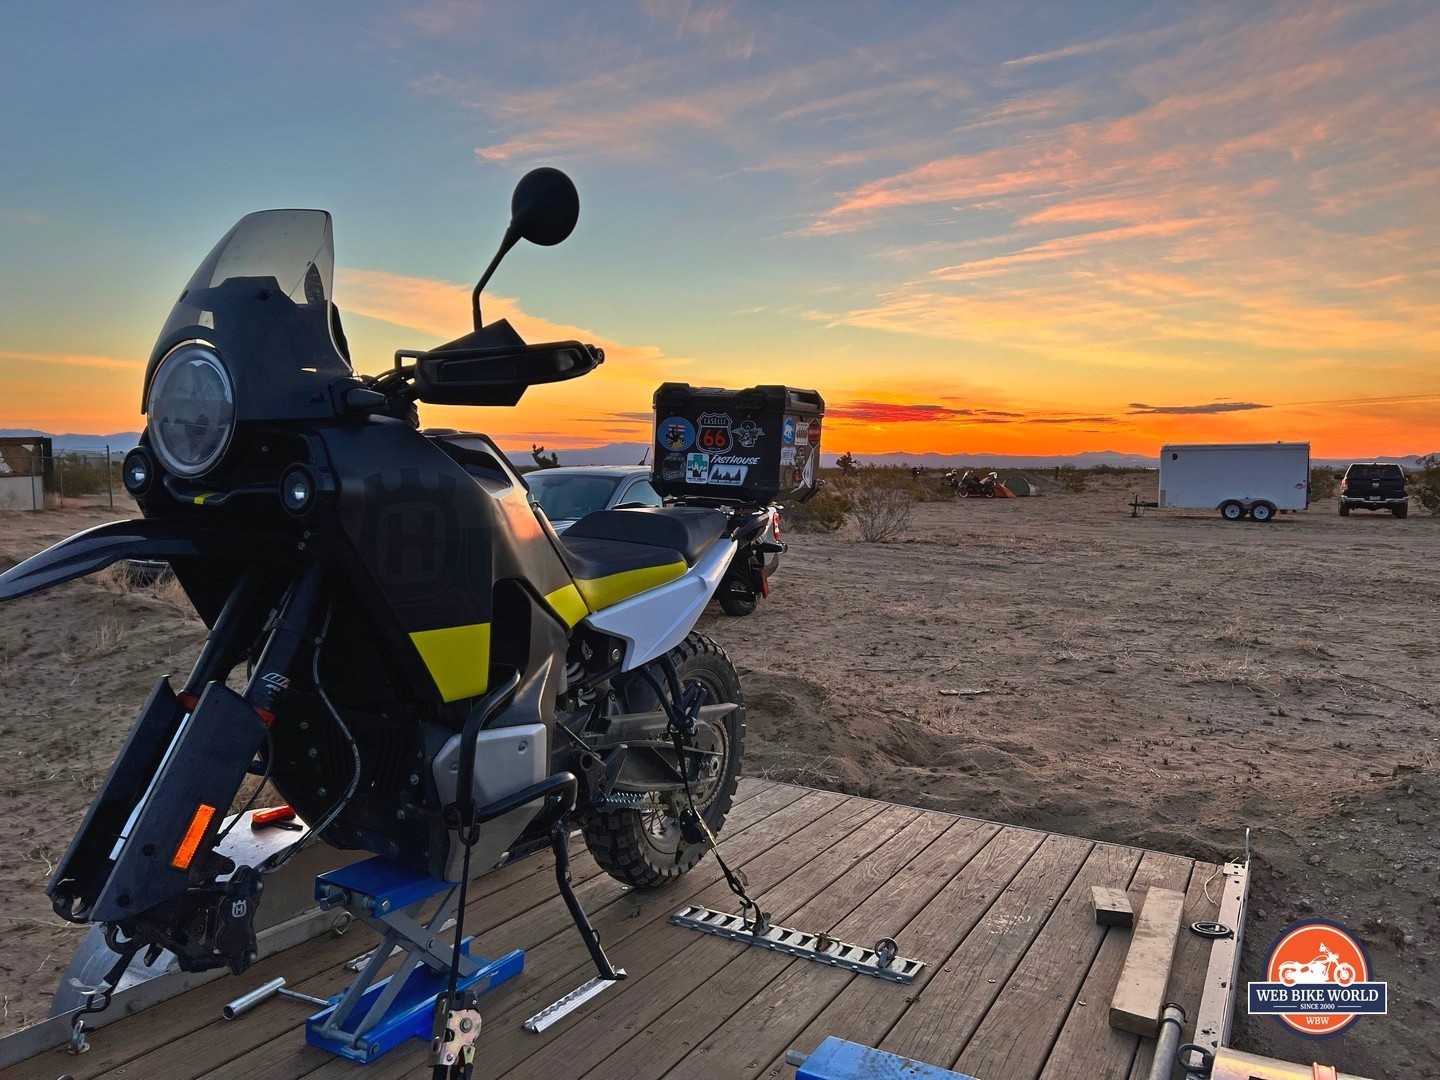 Author's motorcycle parked during sunrise in the Mojave desert